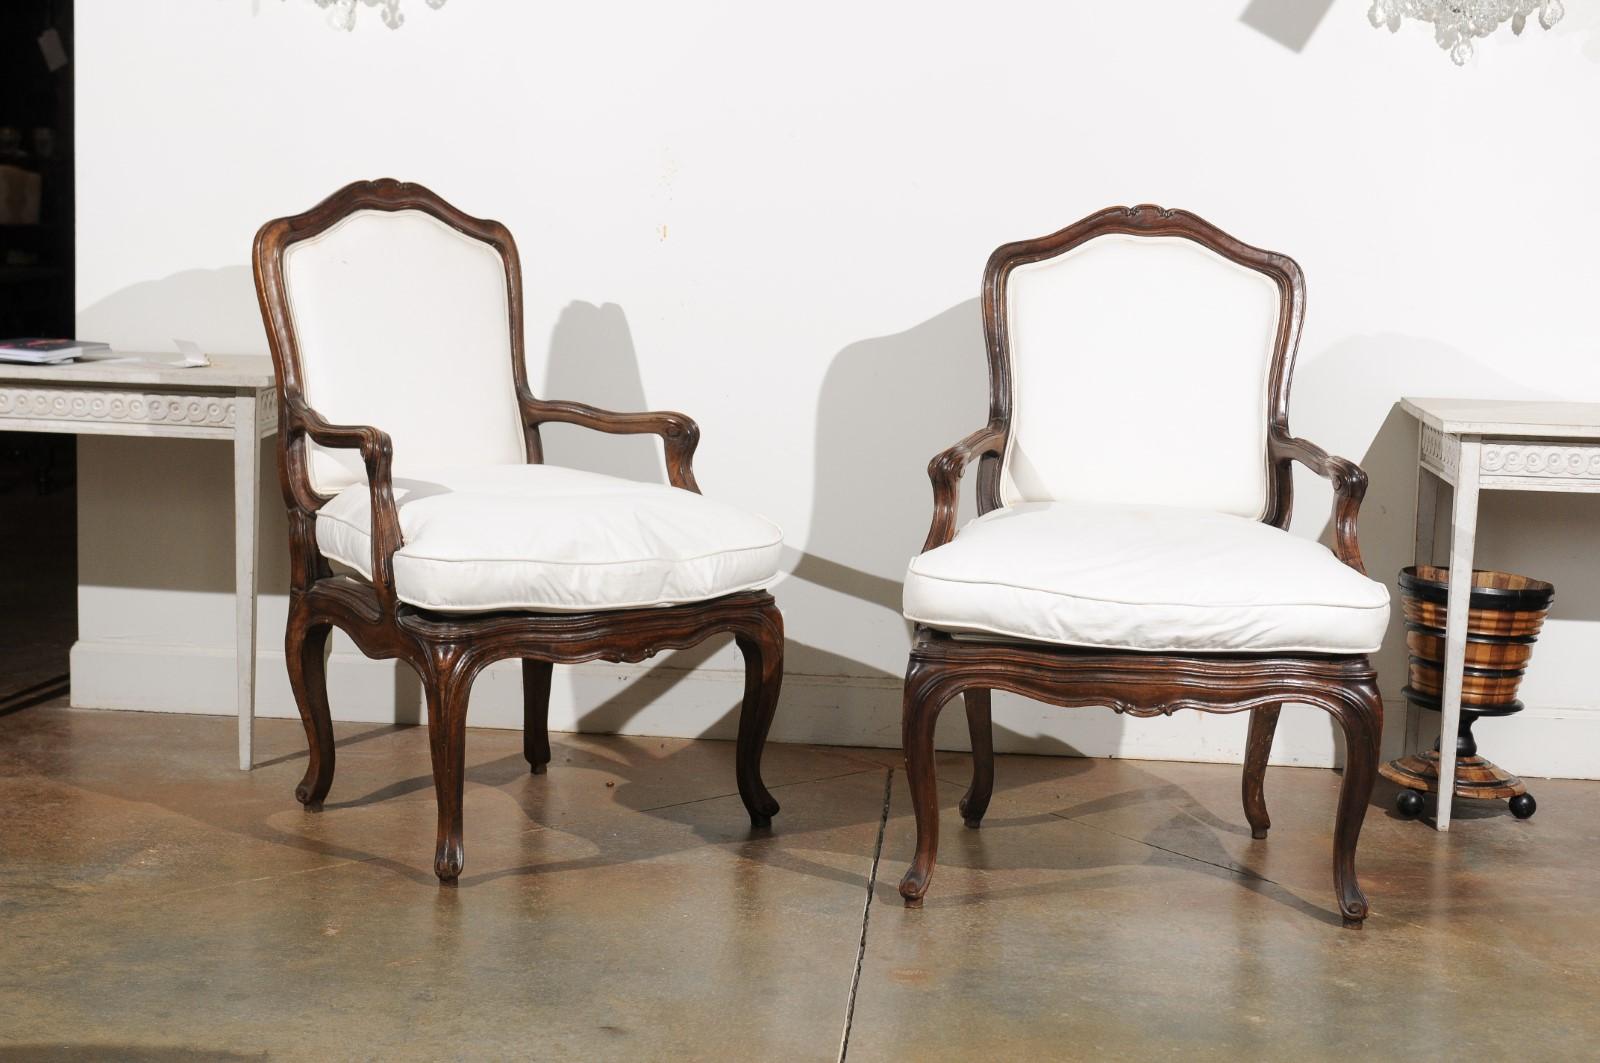 A pair of French Louis XV style walnut fauteuils from the early 19th century, with double welt upholstery and cabriole legs. Born in France during the Restauration period, each of this pair of armchairs features a slightly slanted back topped with a